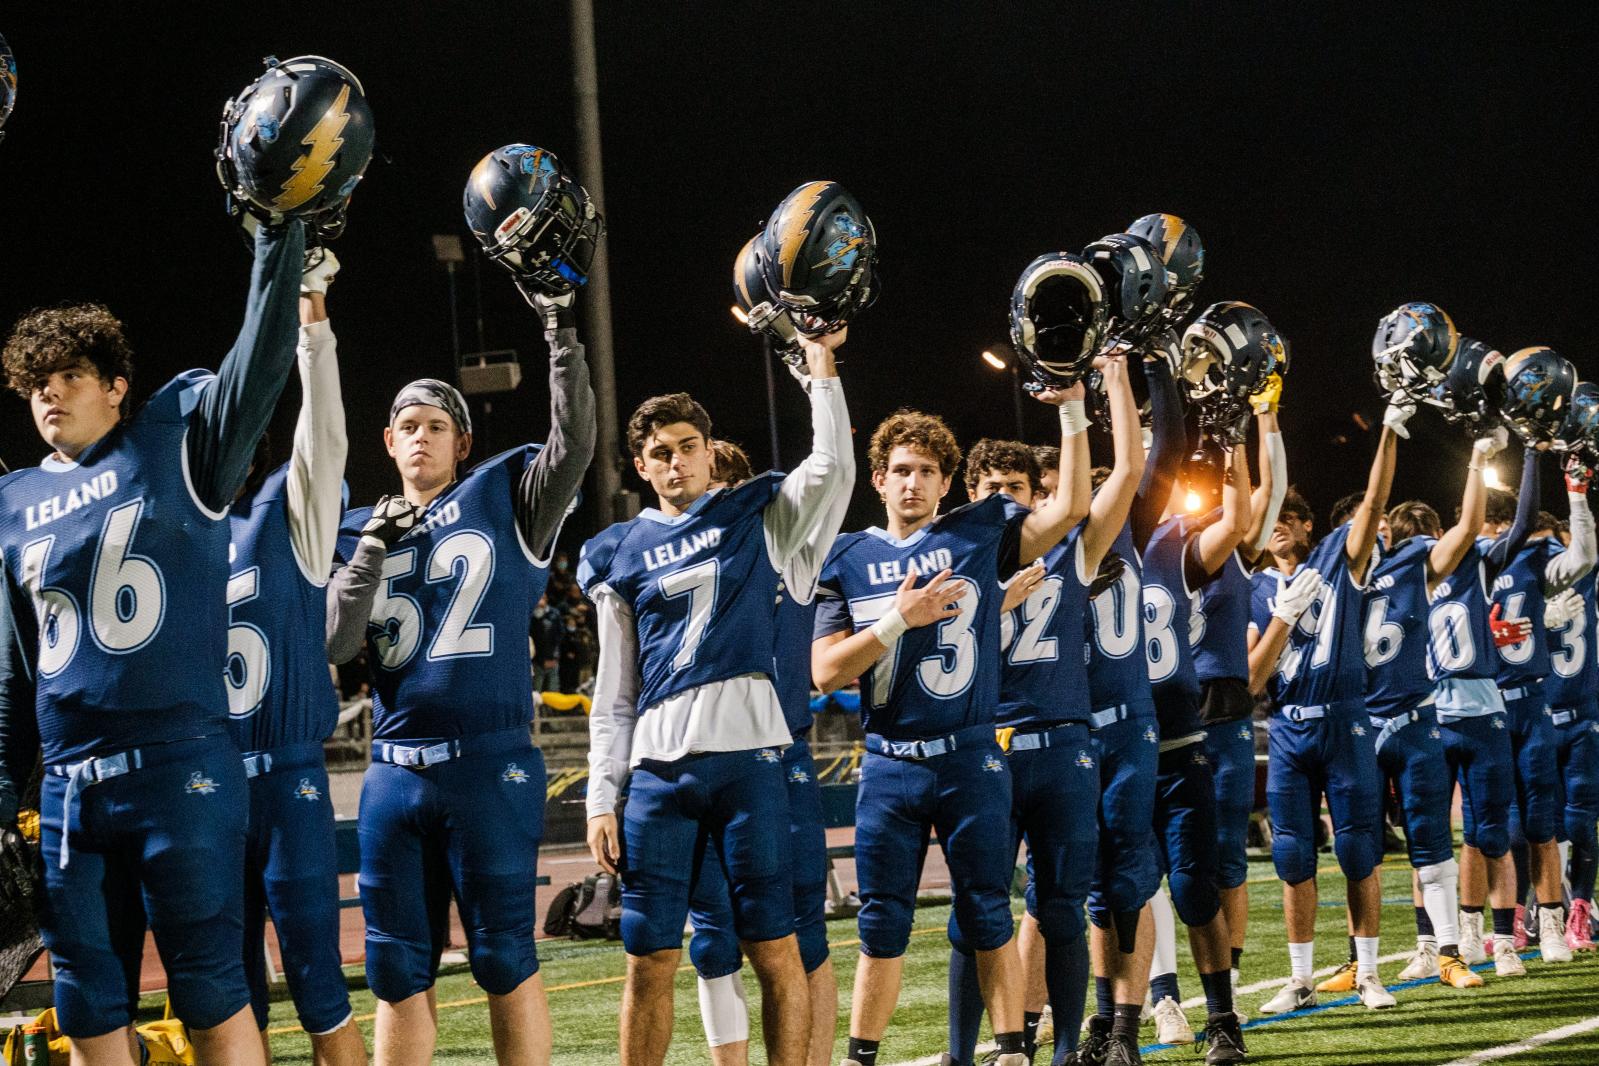 Image from SPORTS - Leland High School football players stand for the...